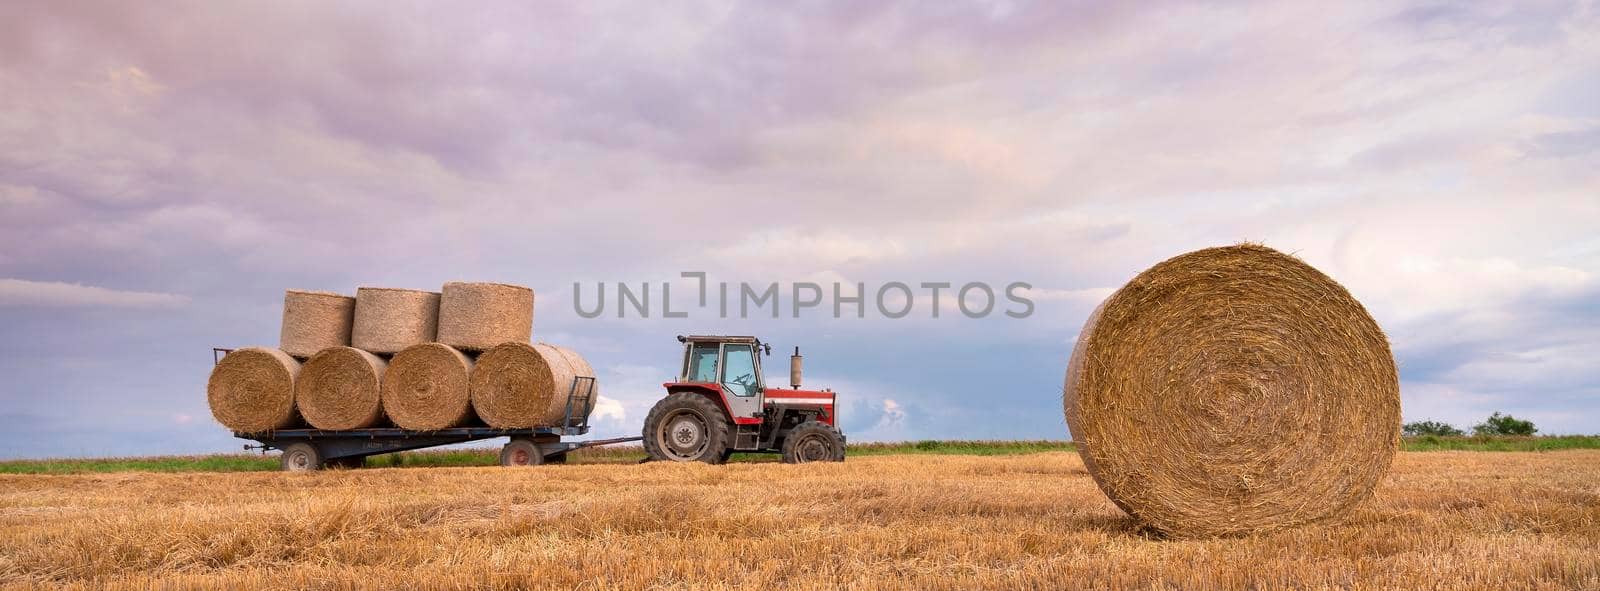 landscape with straw bales and tractor in french ardennes under cloudy sky during sunset in summer